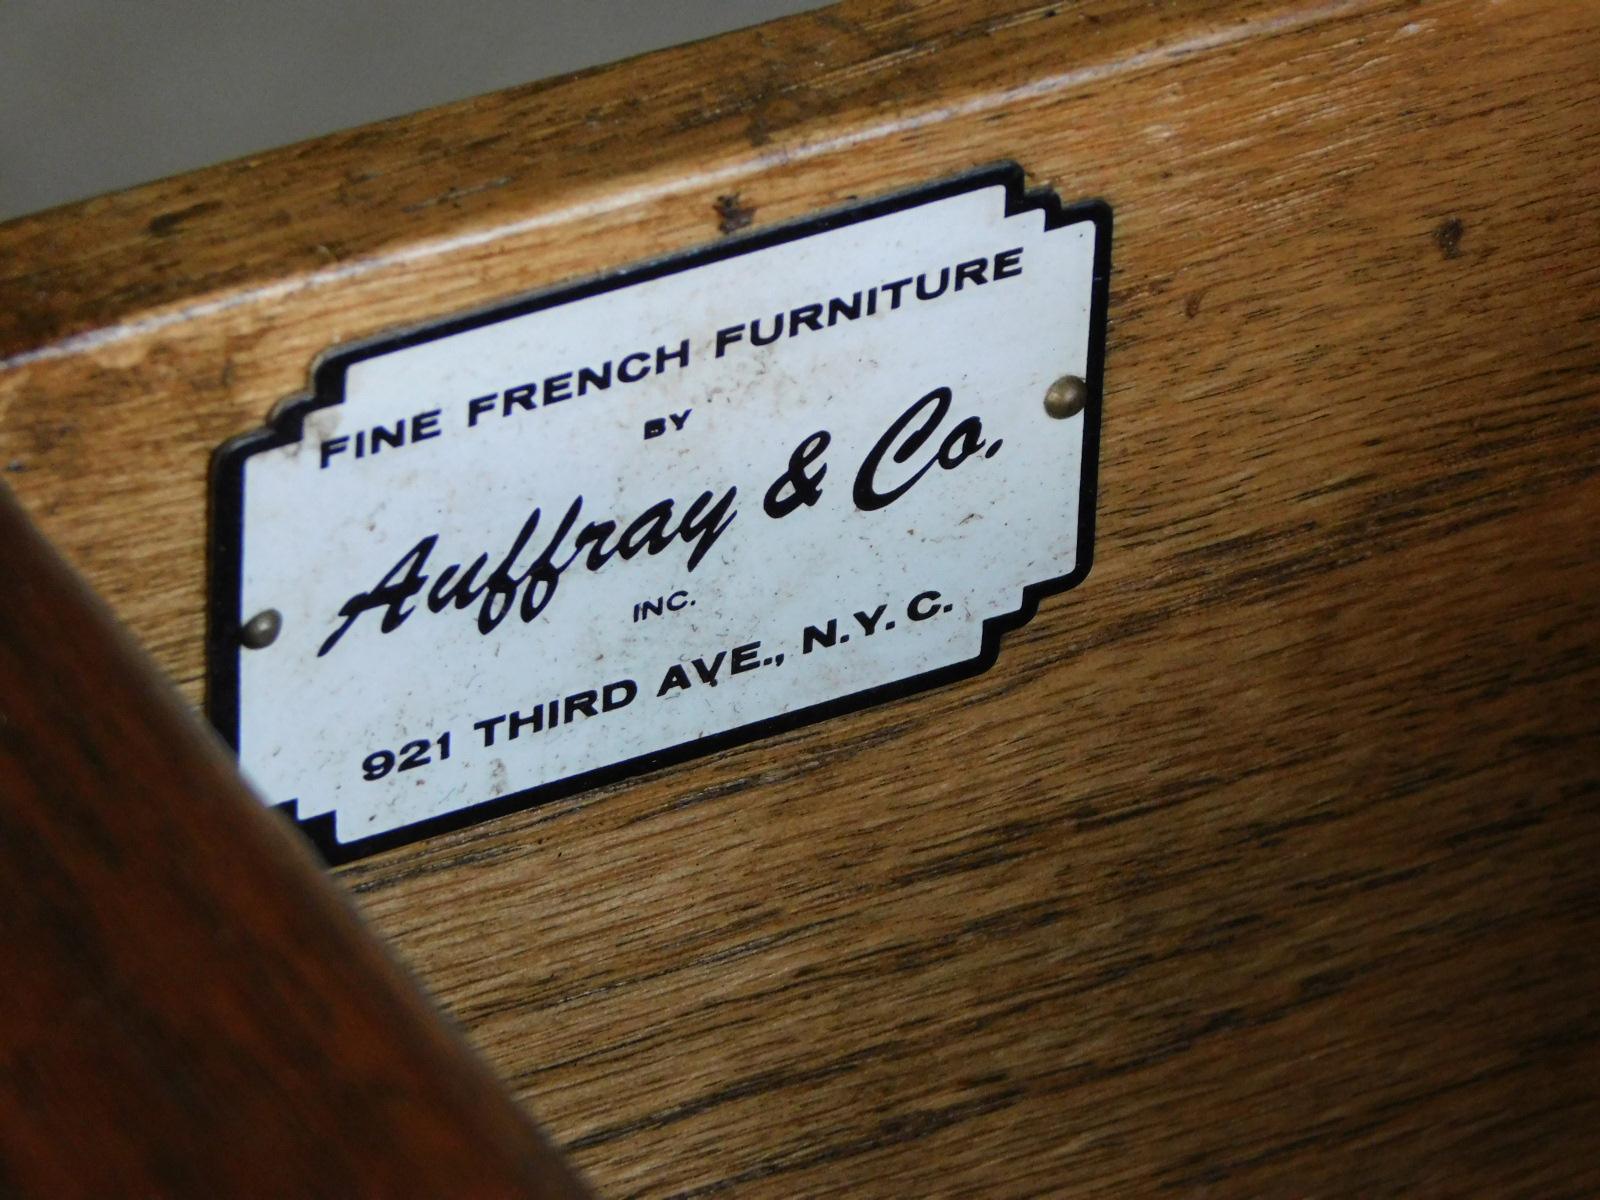 Mid-20th Century Good Quality Walnut Bombé-form 2-drawer Chest by Auffray & Co., NY